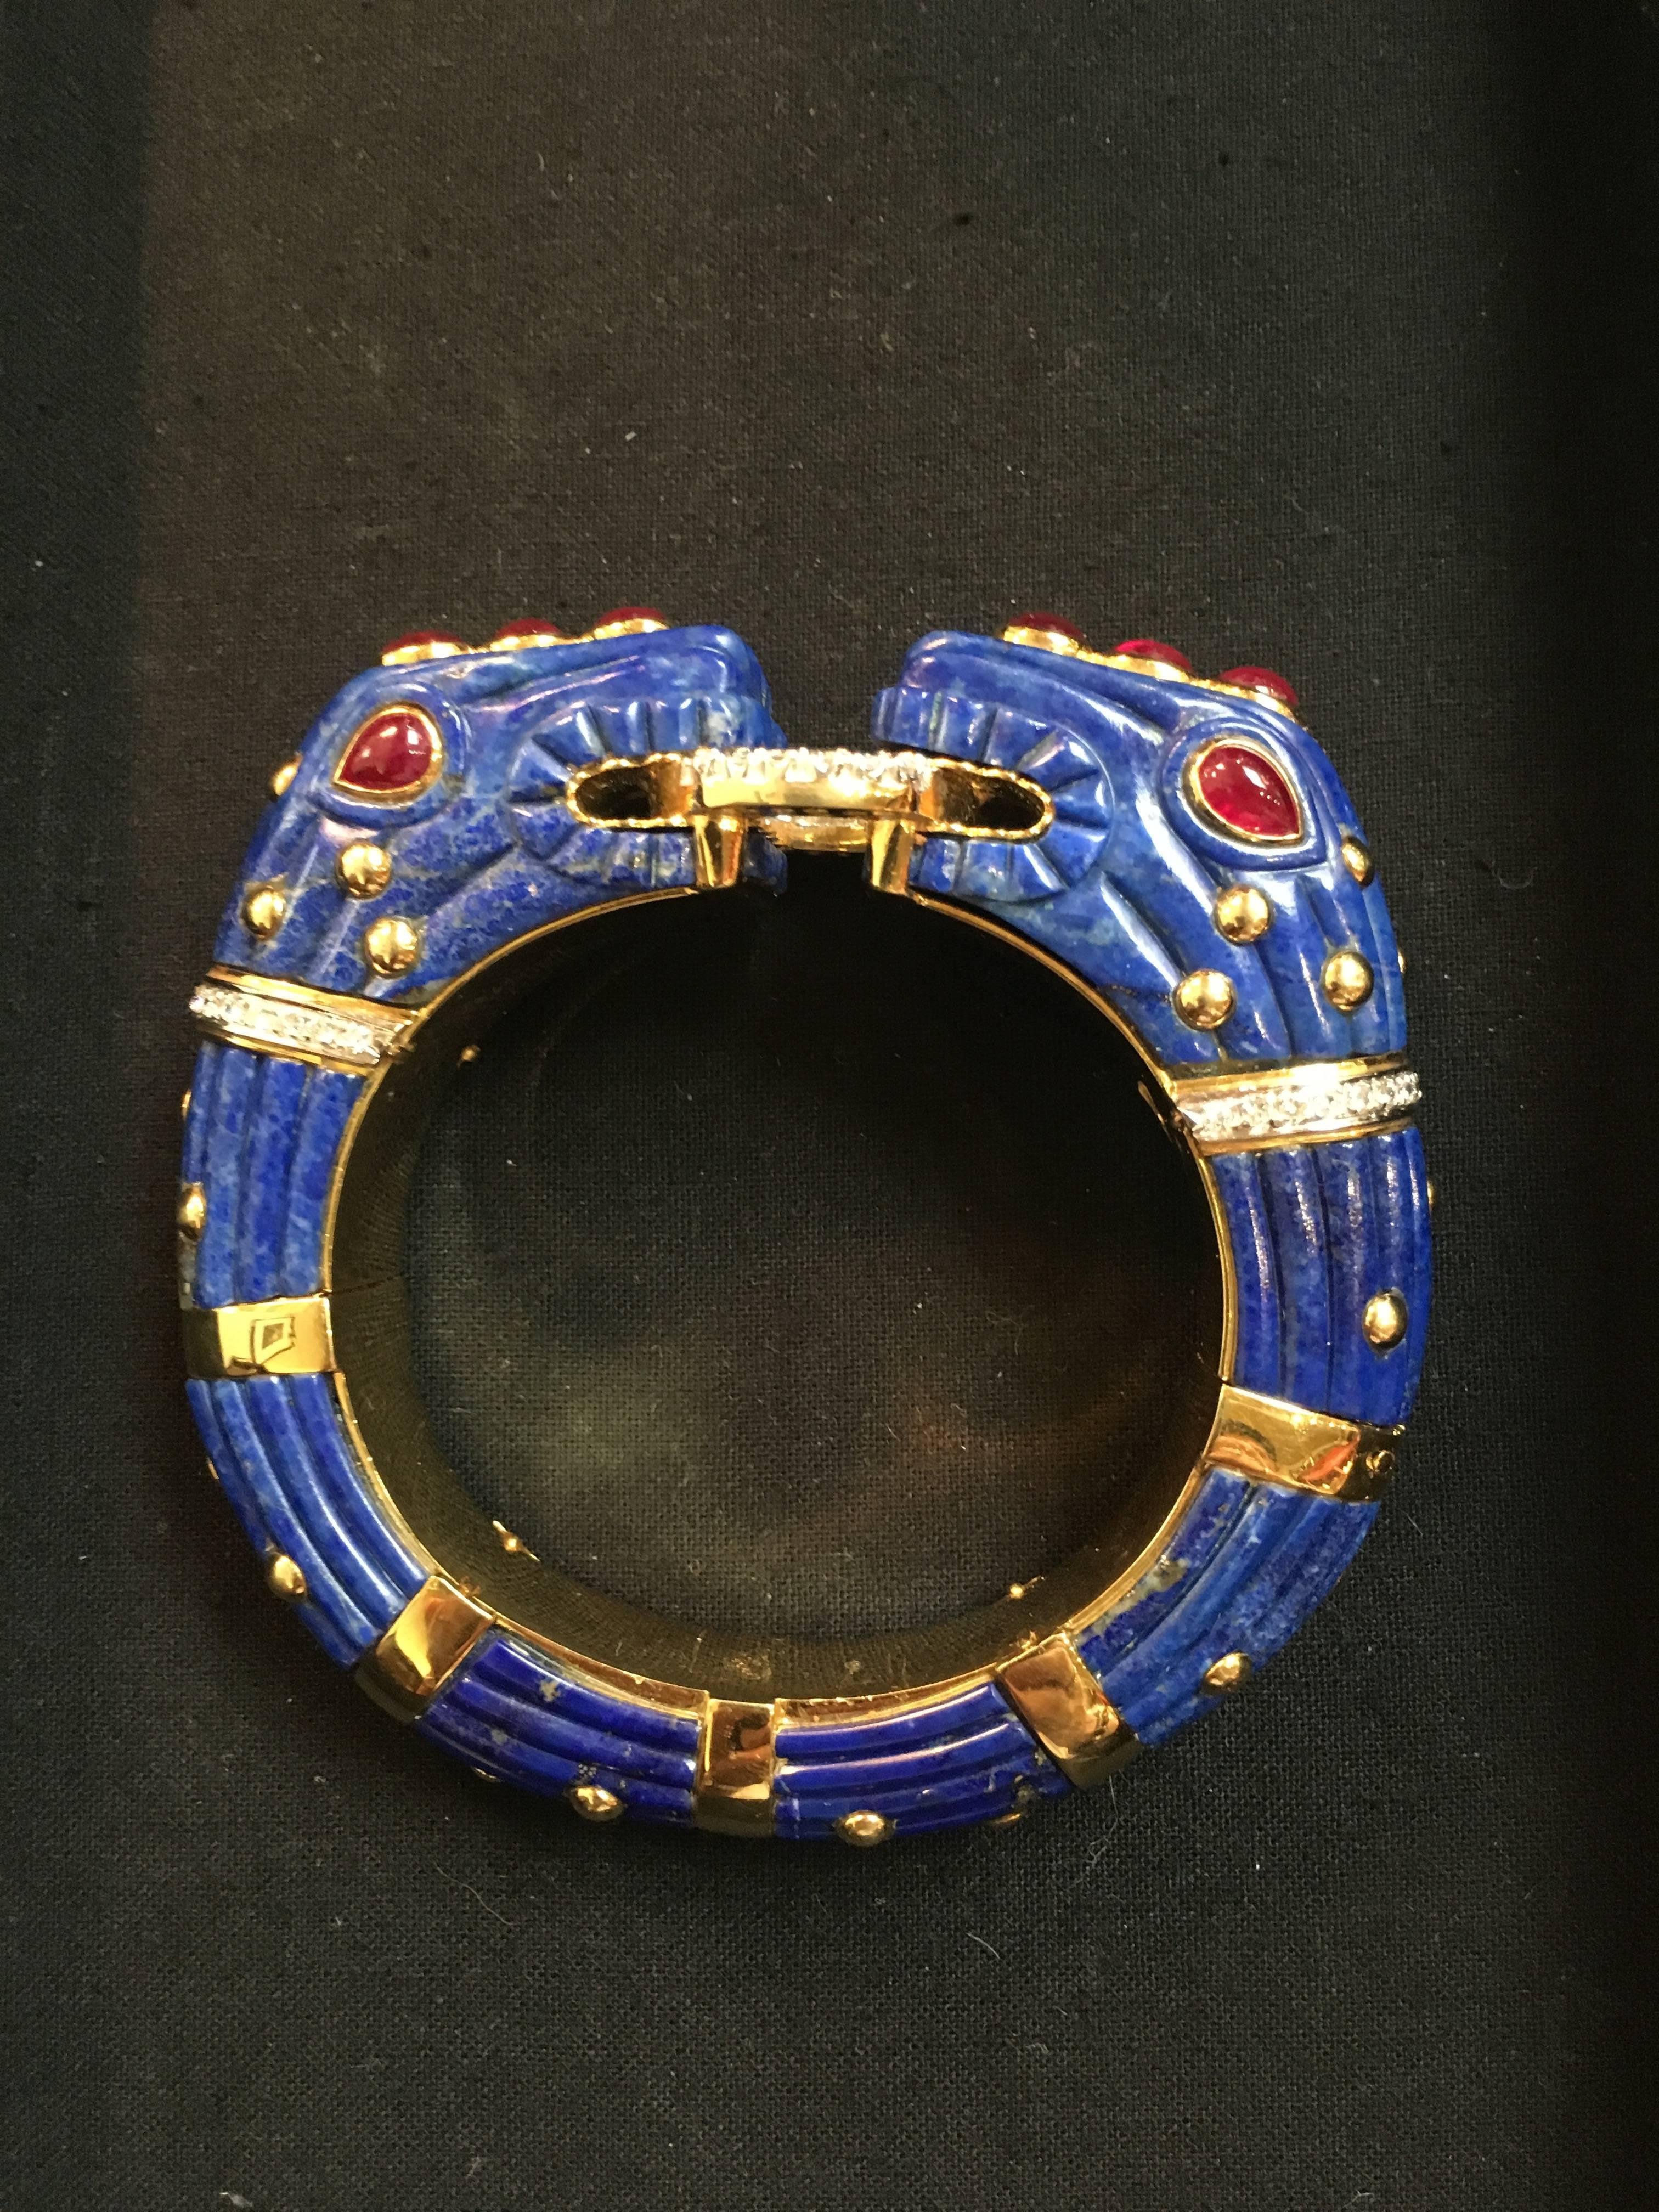 A stunning lapis, diamond and ruby bracelet featuring a pair of chimera heads holding a diamond encrusted ring. The lapis studded with 18k gold "spots". Each head with large ruby cabochon eyes and a crown of three ruby cabochons on a pave